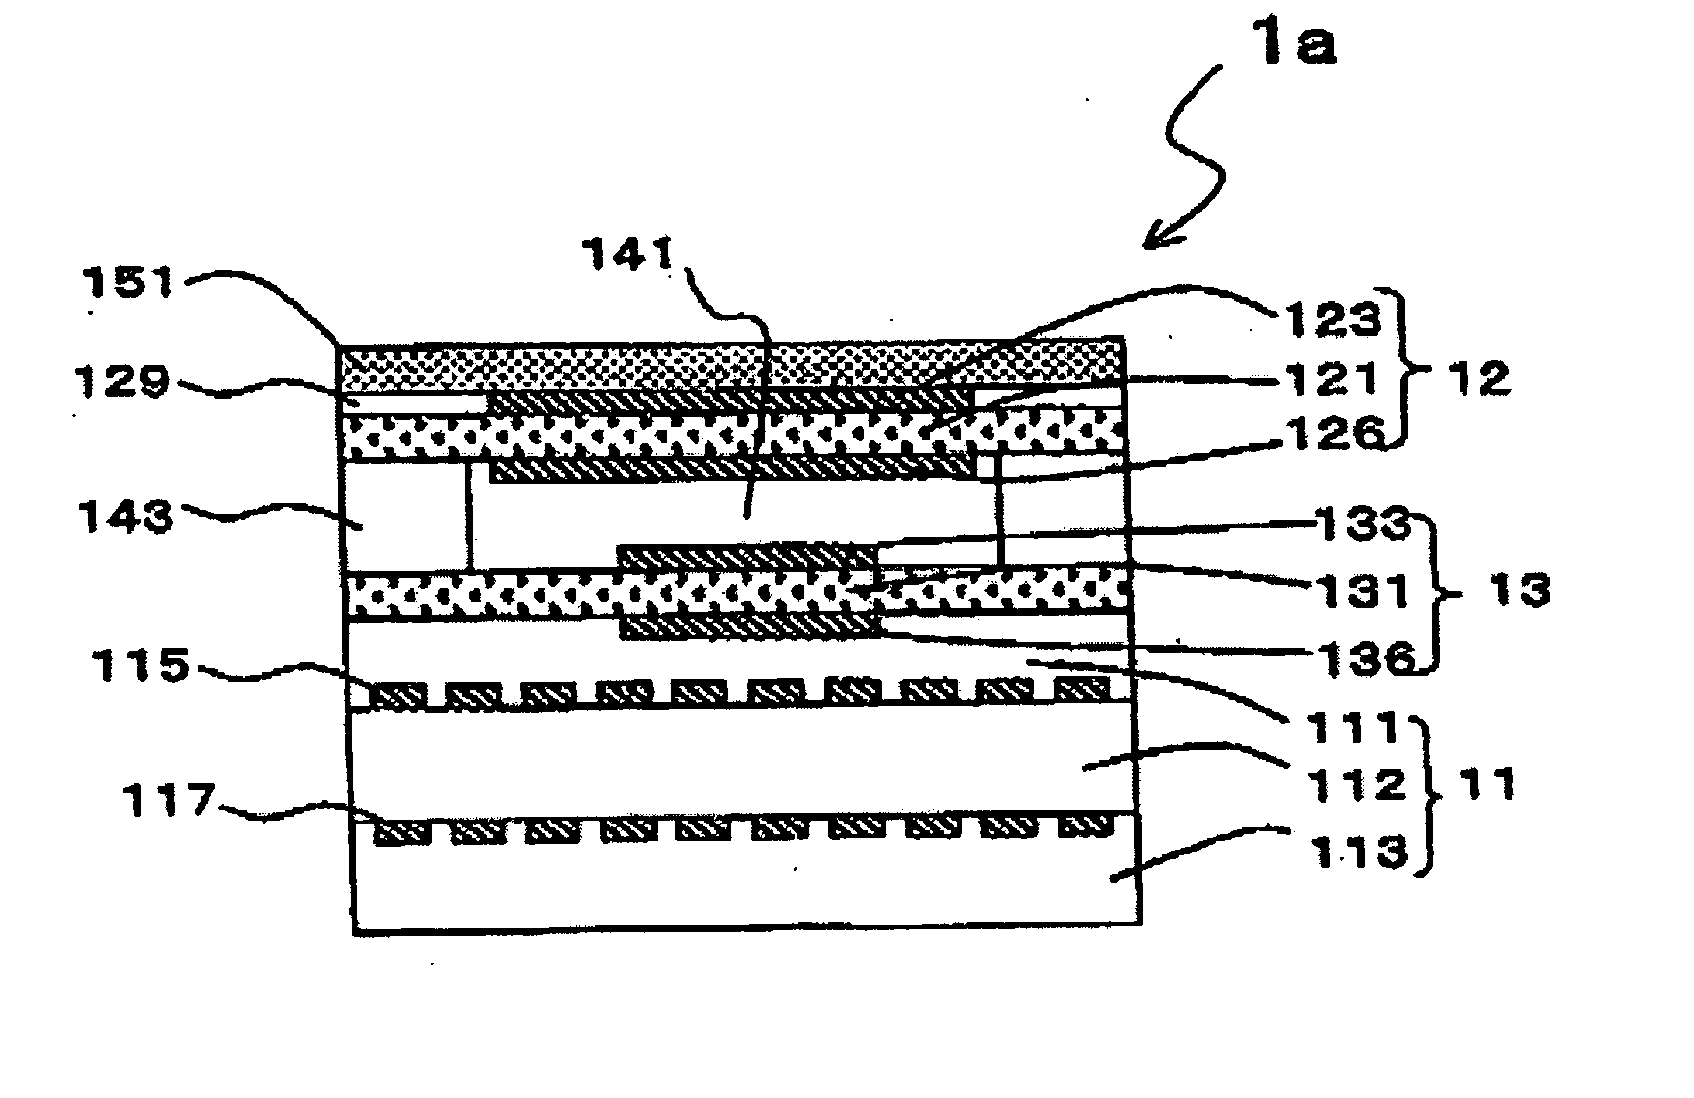 Gas sensor having a laminate comprising solid electrolyte layers and alumina substrate